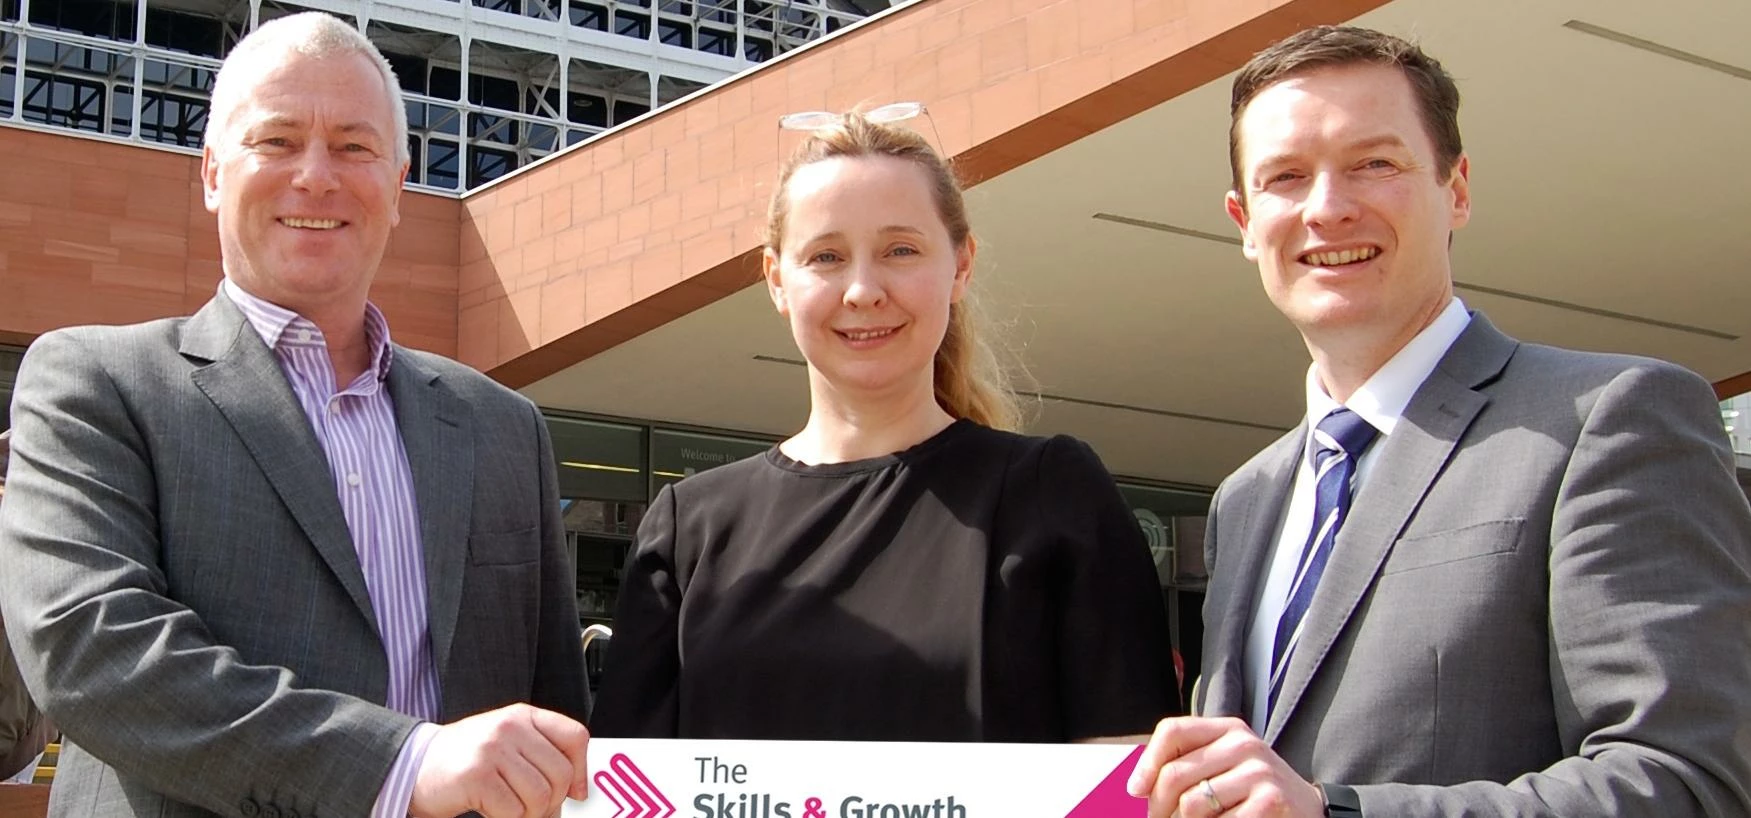 L-R: Paul Chapman, a business connector with the Skills and Growth Company; Denise Proctor, chair of